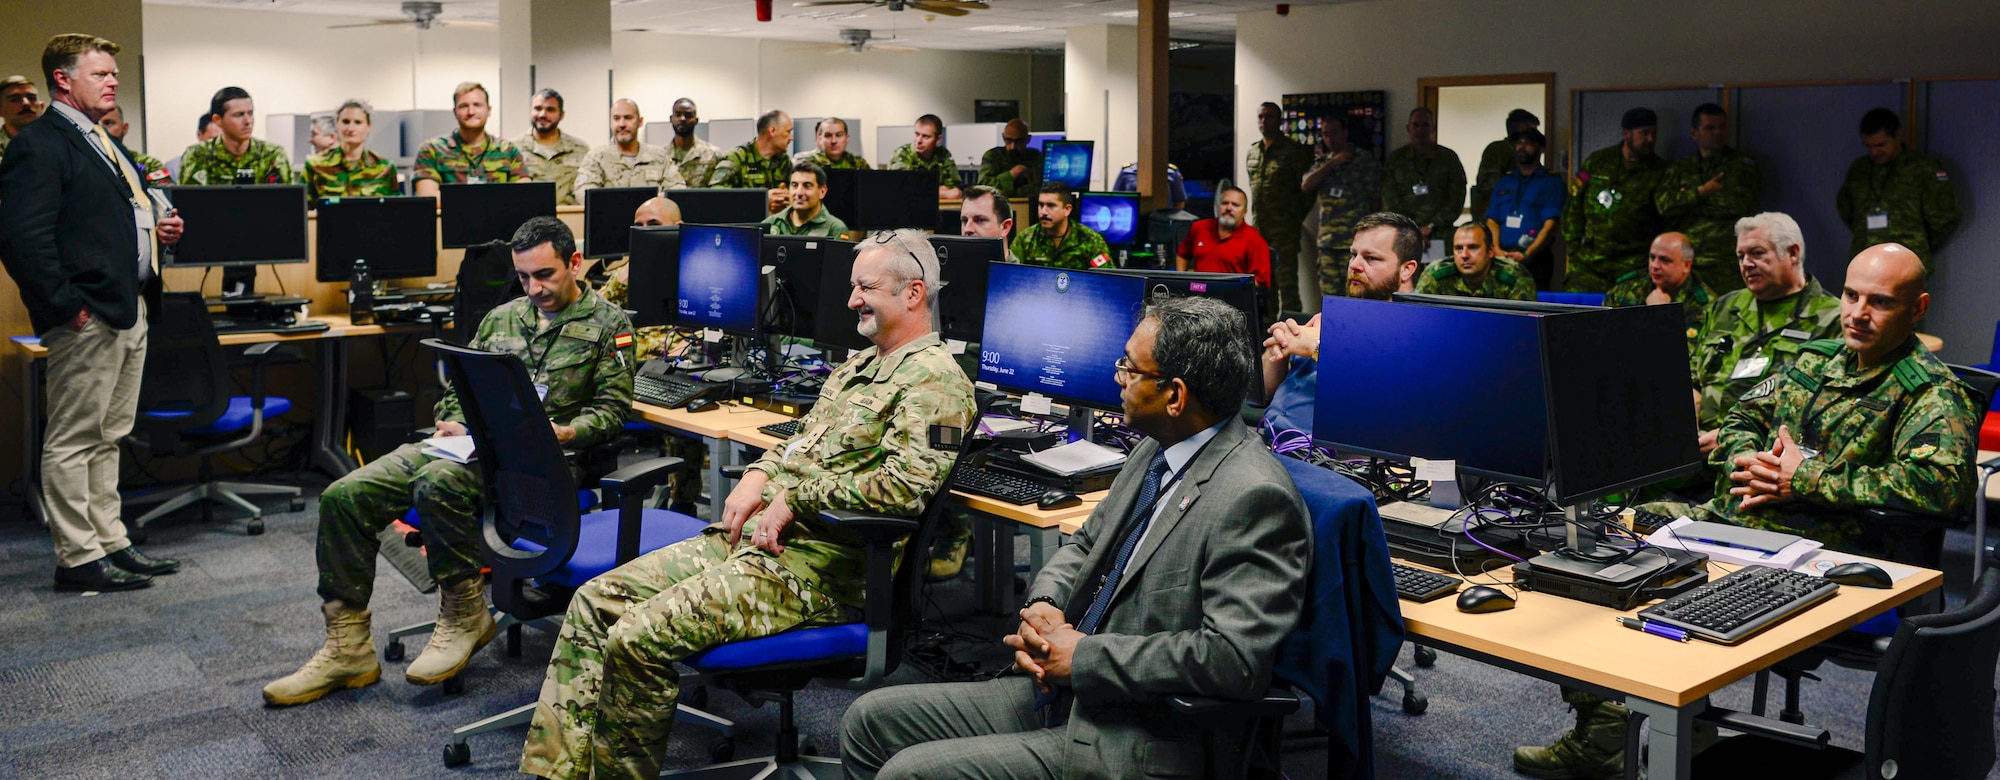 NATO allies and partners from 19 countries receive a briefing at the European Partnership Integration Enterprise as part of exercise Unified Vision 2023 at Ramstein Air Base, Germany, June 22, 2023. Nearly 60 service members participated in the joint intelligence, surveillance and reconnaissance exercise aiming to integrate ISR capabilities and procedures across the alliance, enabling a unified intelligence enterprise.